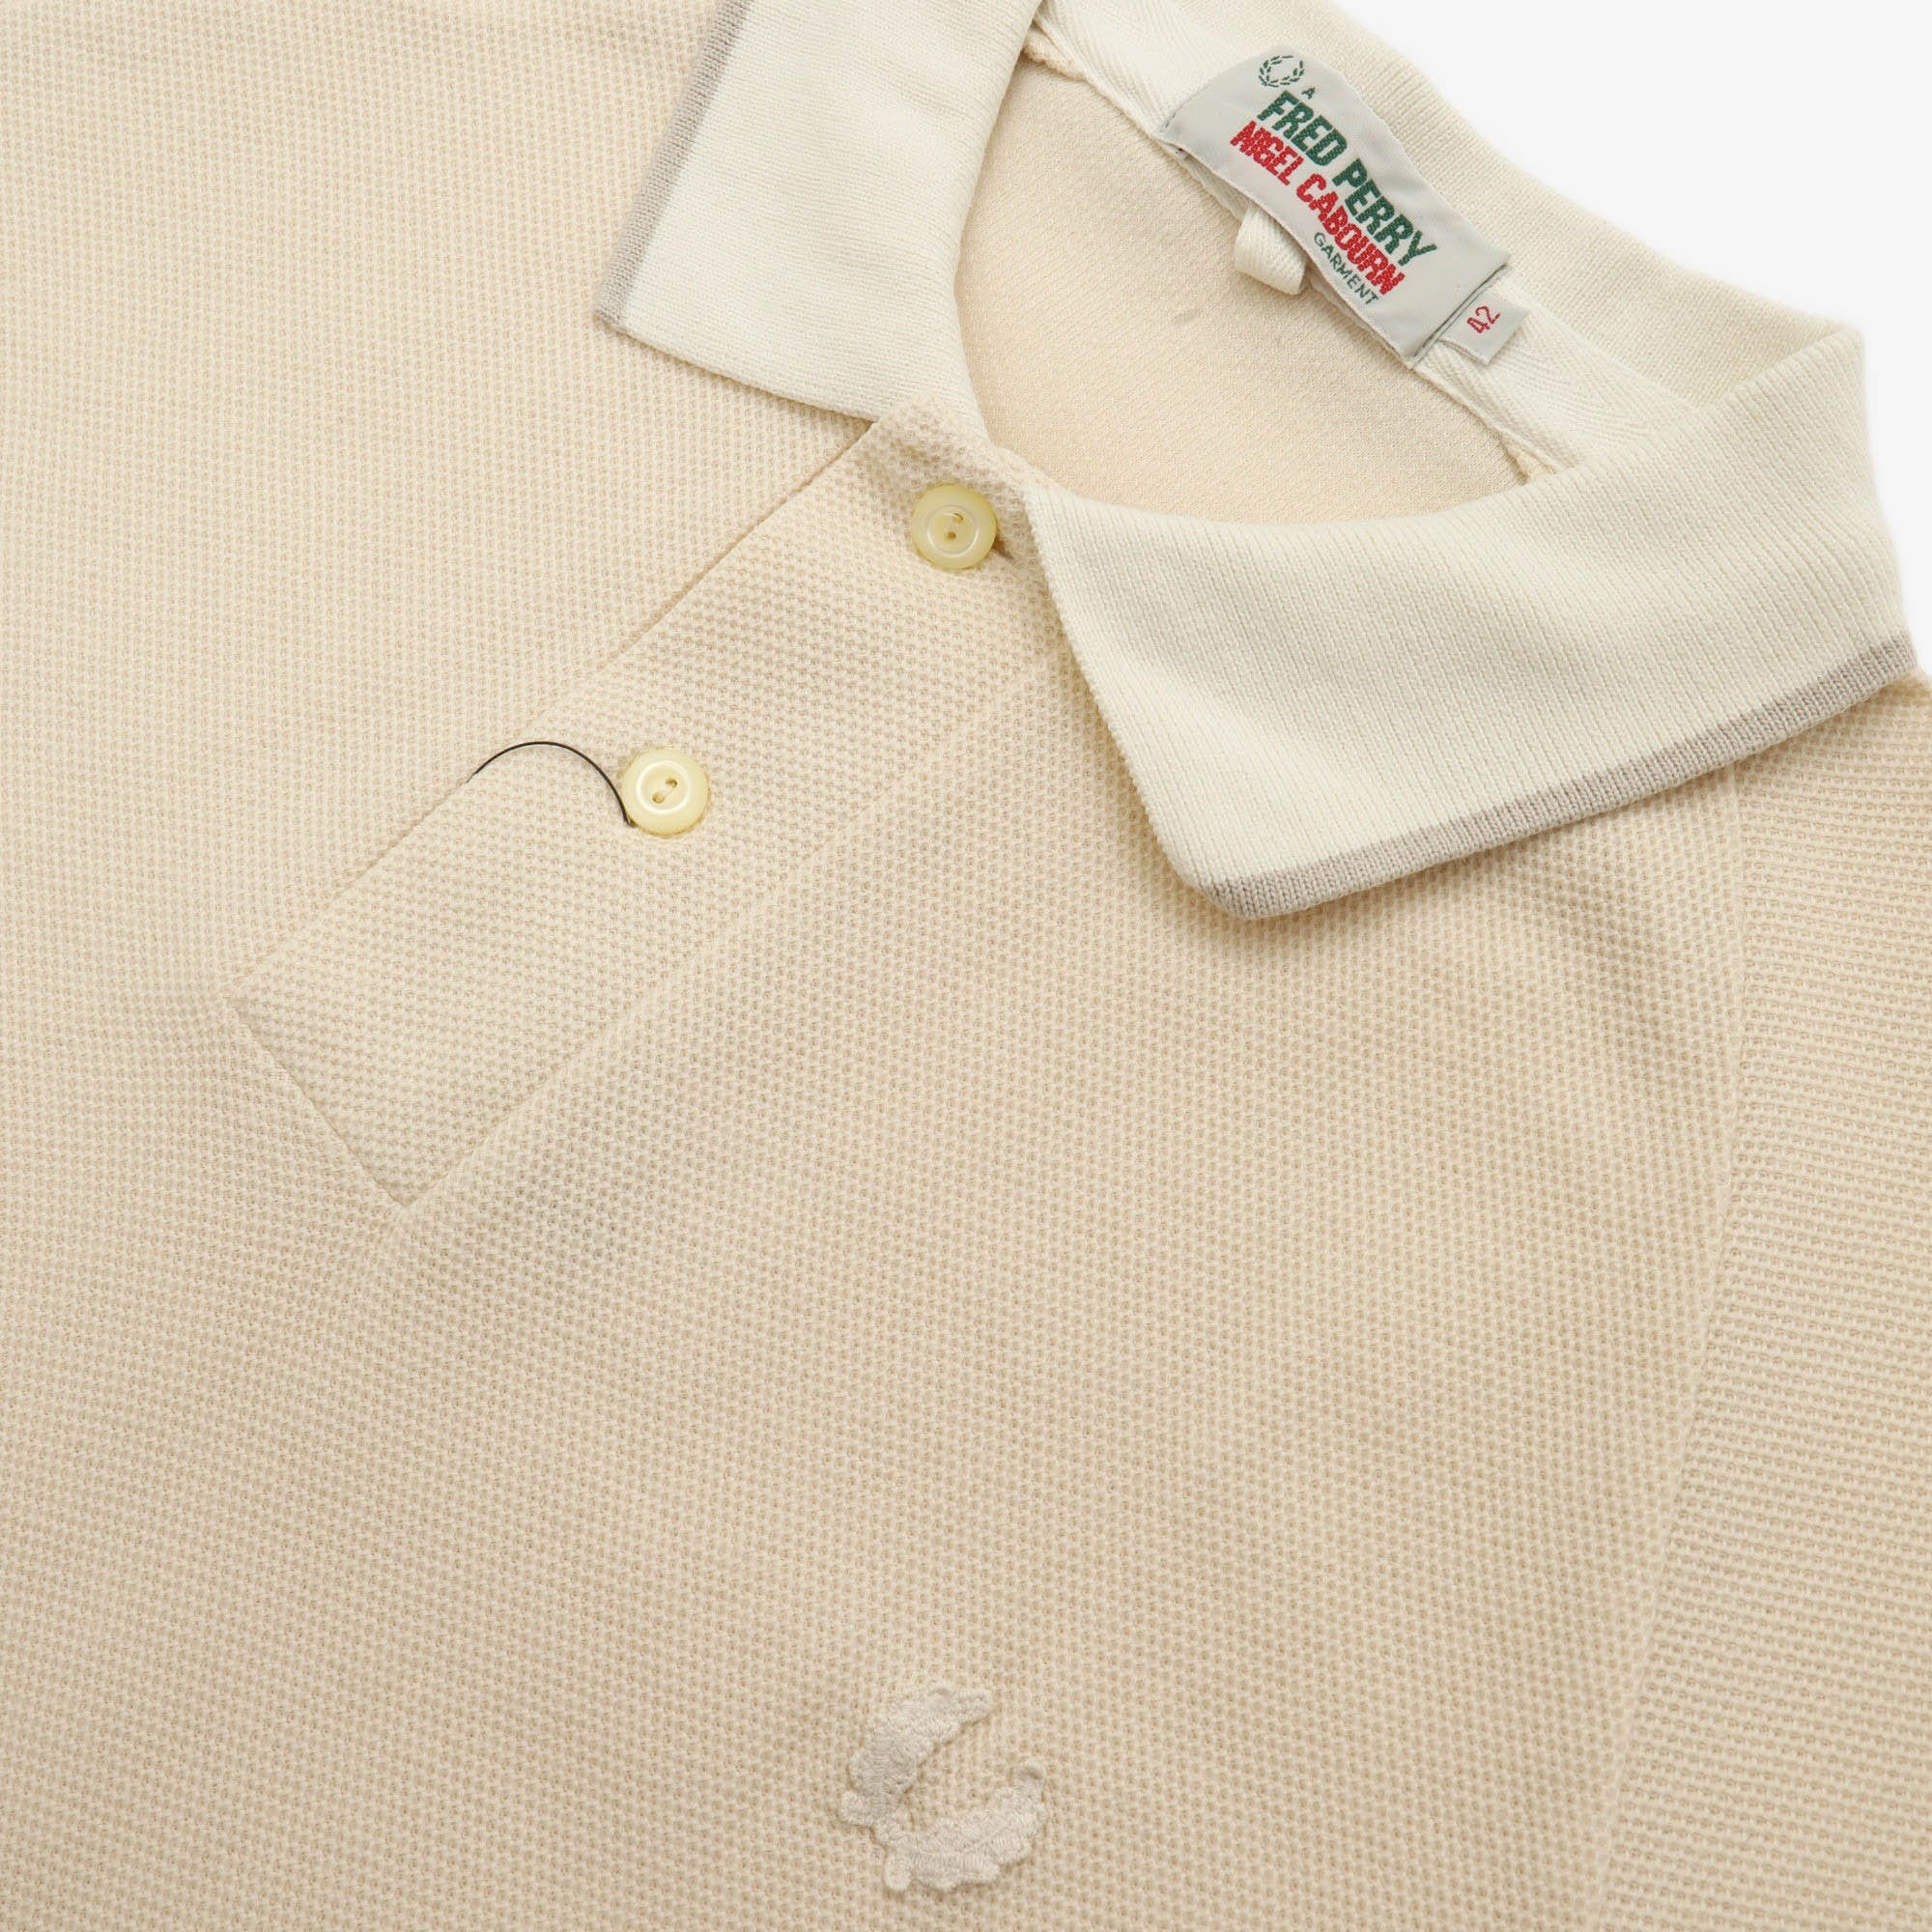 Nigel Cabourn Polo Top